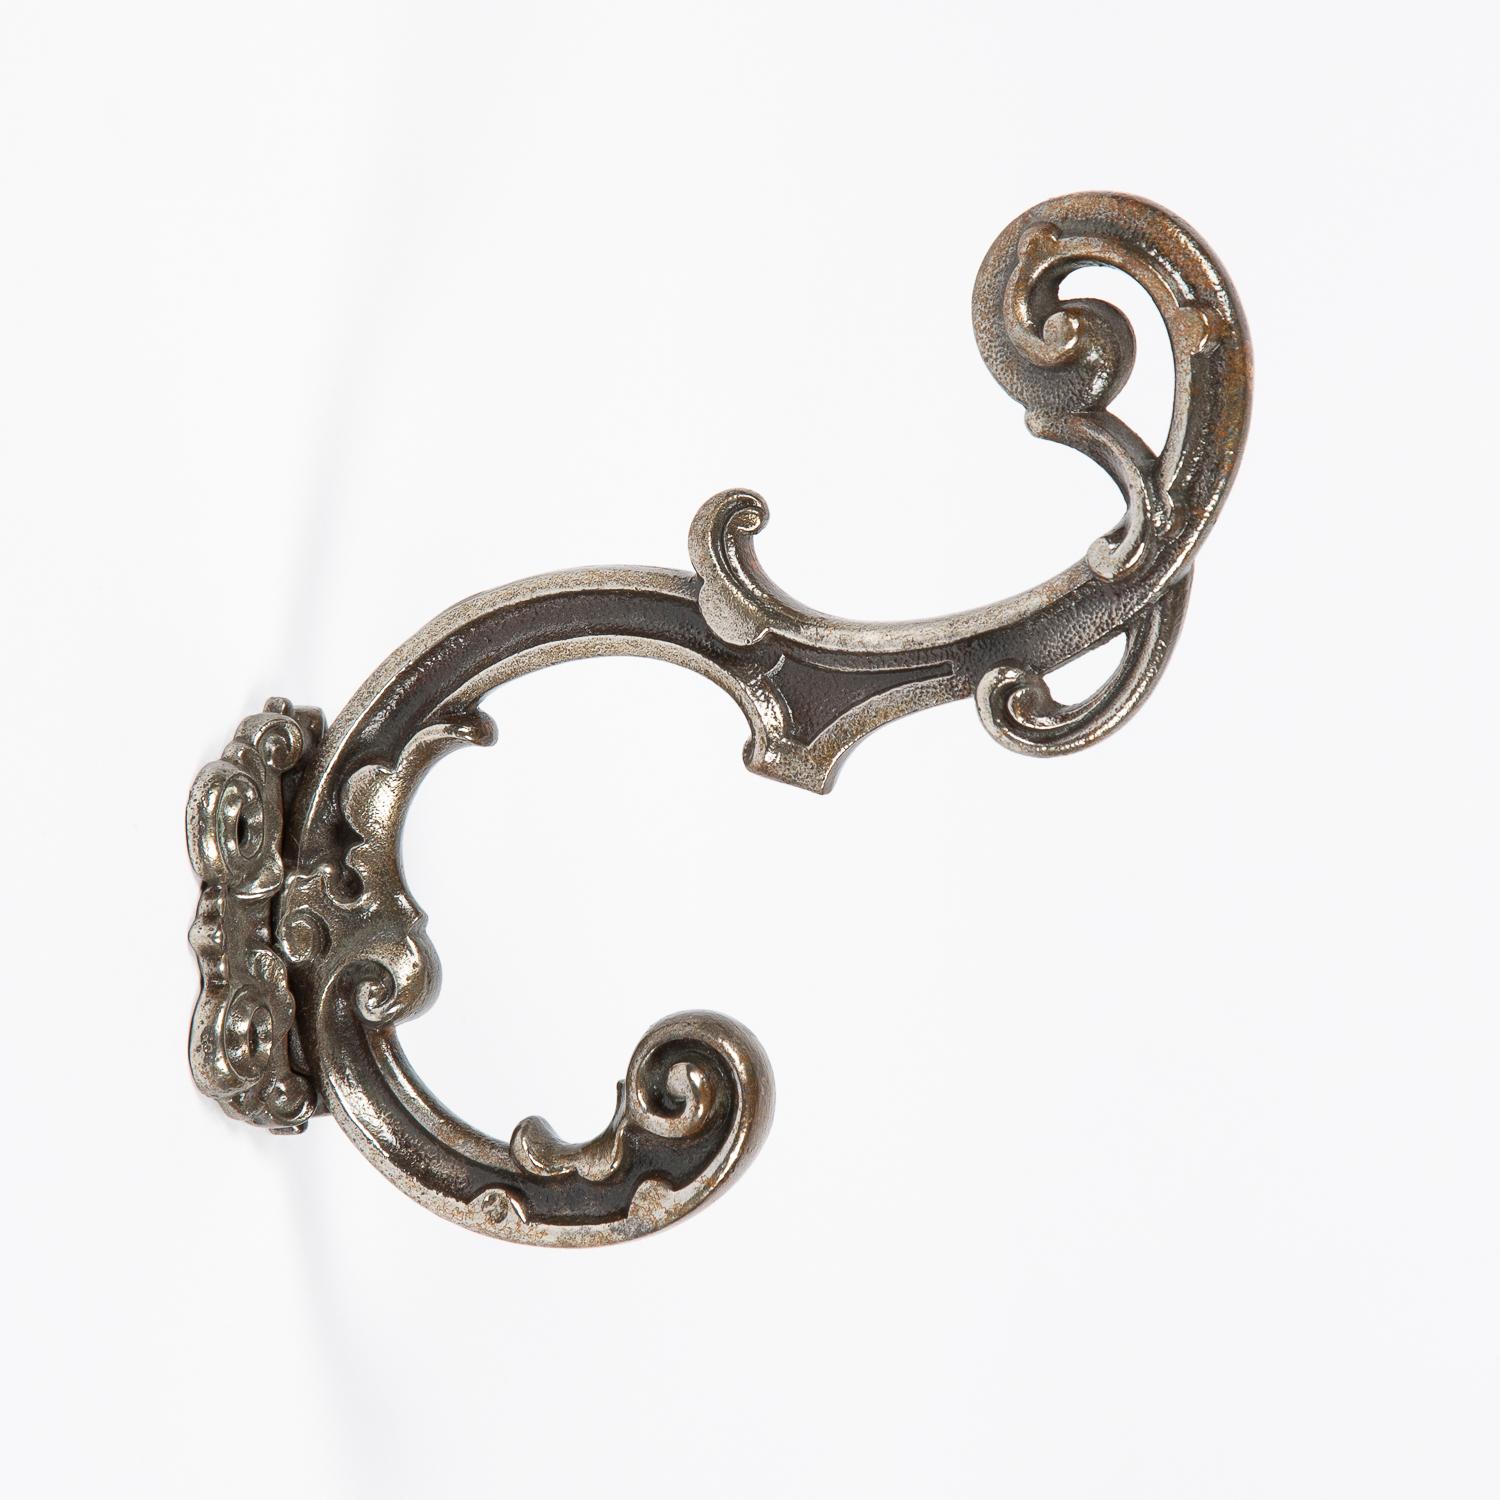 A set of 3 Victorian cast iron hat and coat hooks, circa 1900.

Coalbrookdale style with foliate decoration.

Projection from wall: 6 1/2 inches - 17 cm.